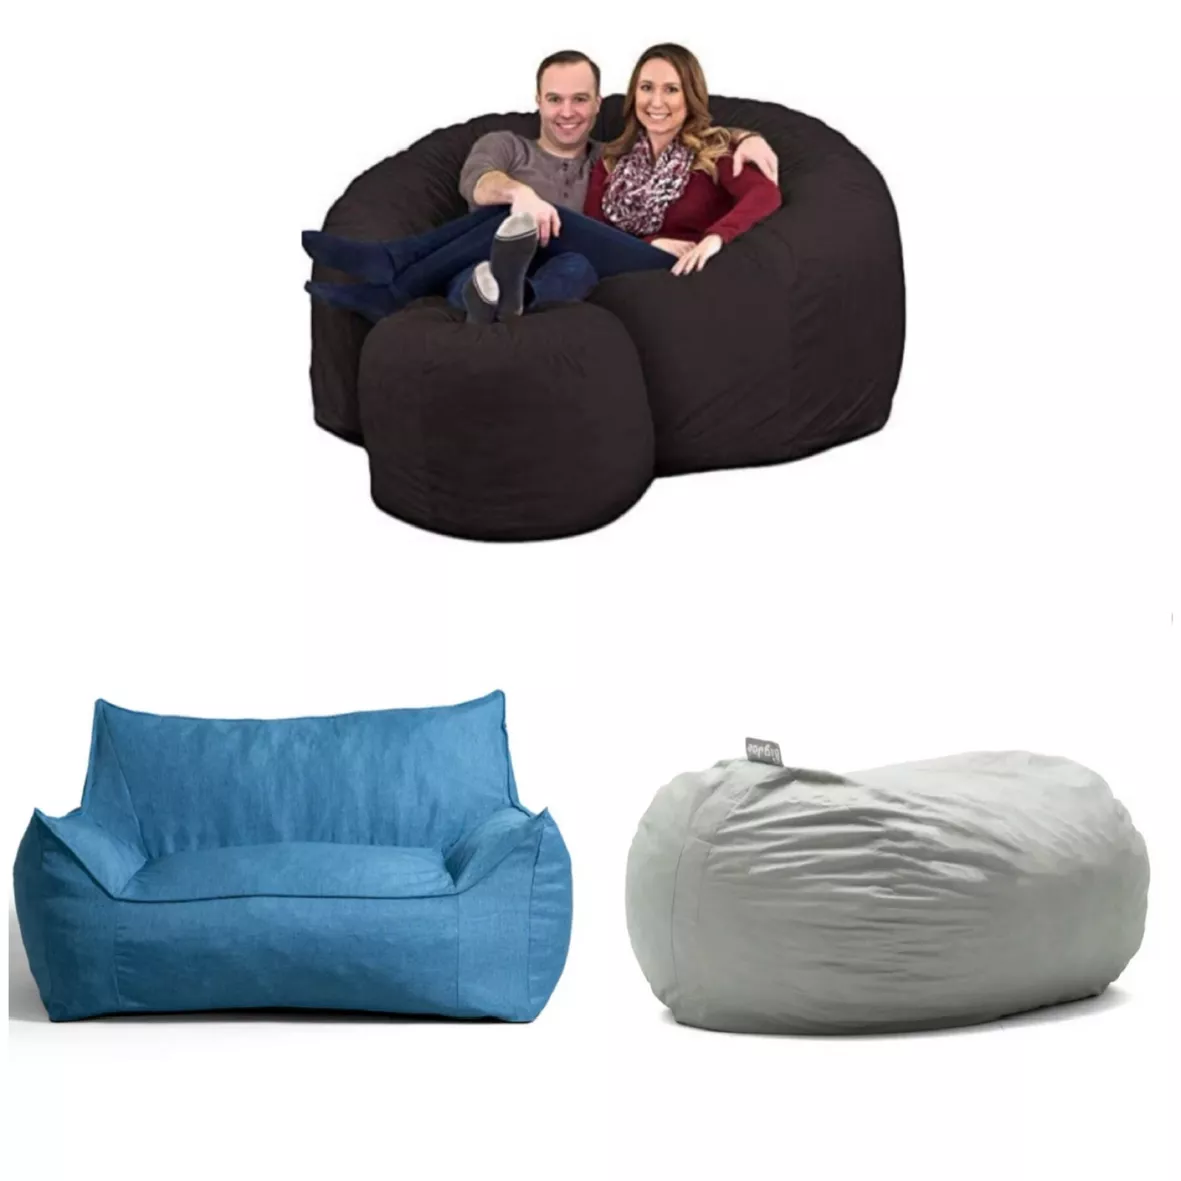 Unconventional nursery chair - we decided on the Big Joe imperial bean bag  because it's so wide and has as good a back support as a couch! :  r/parentsofmultiples